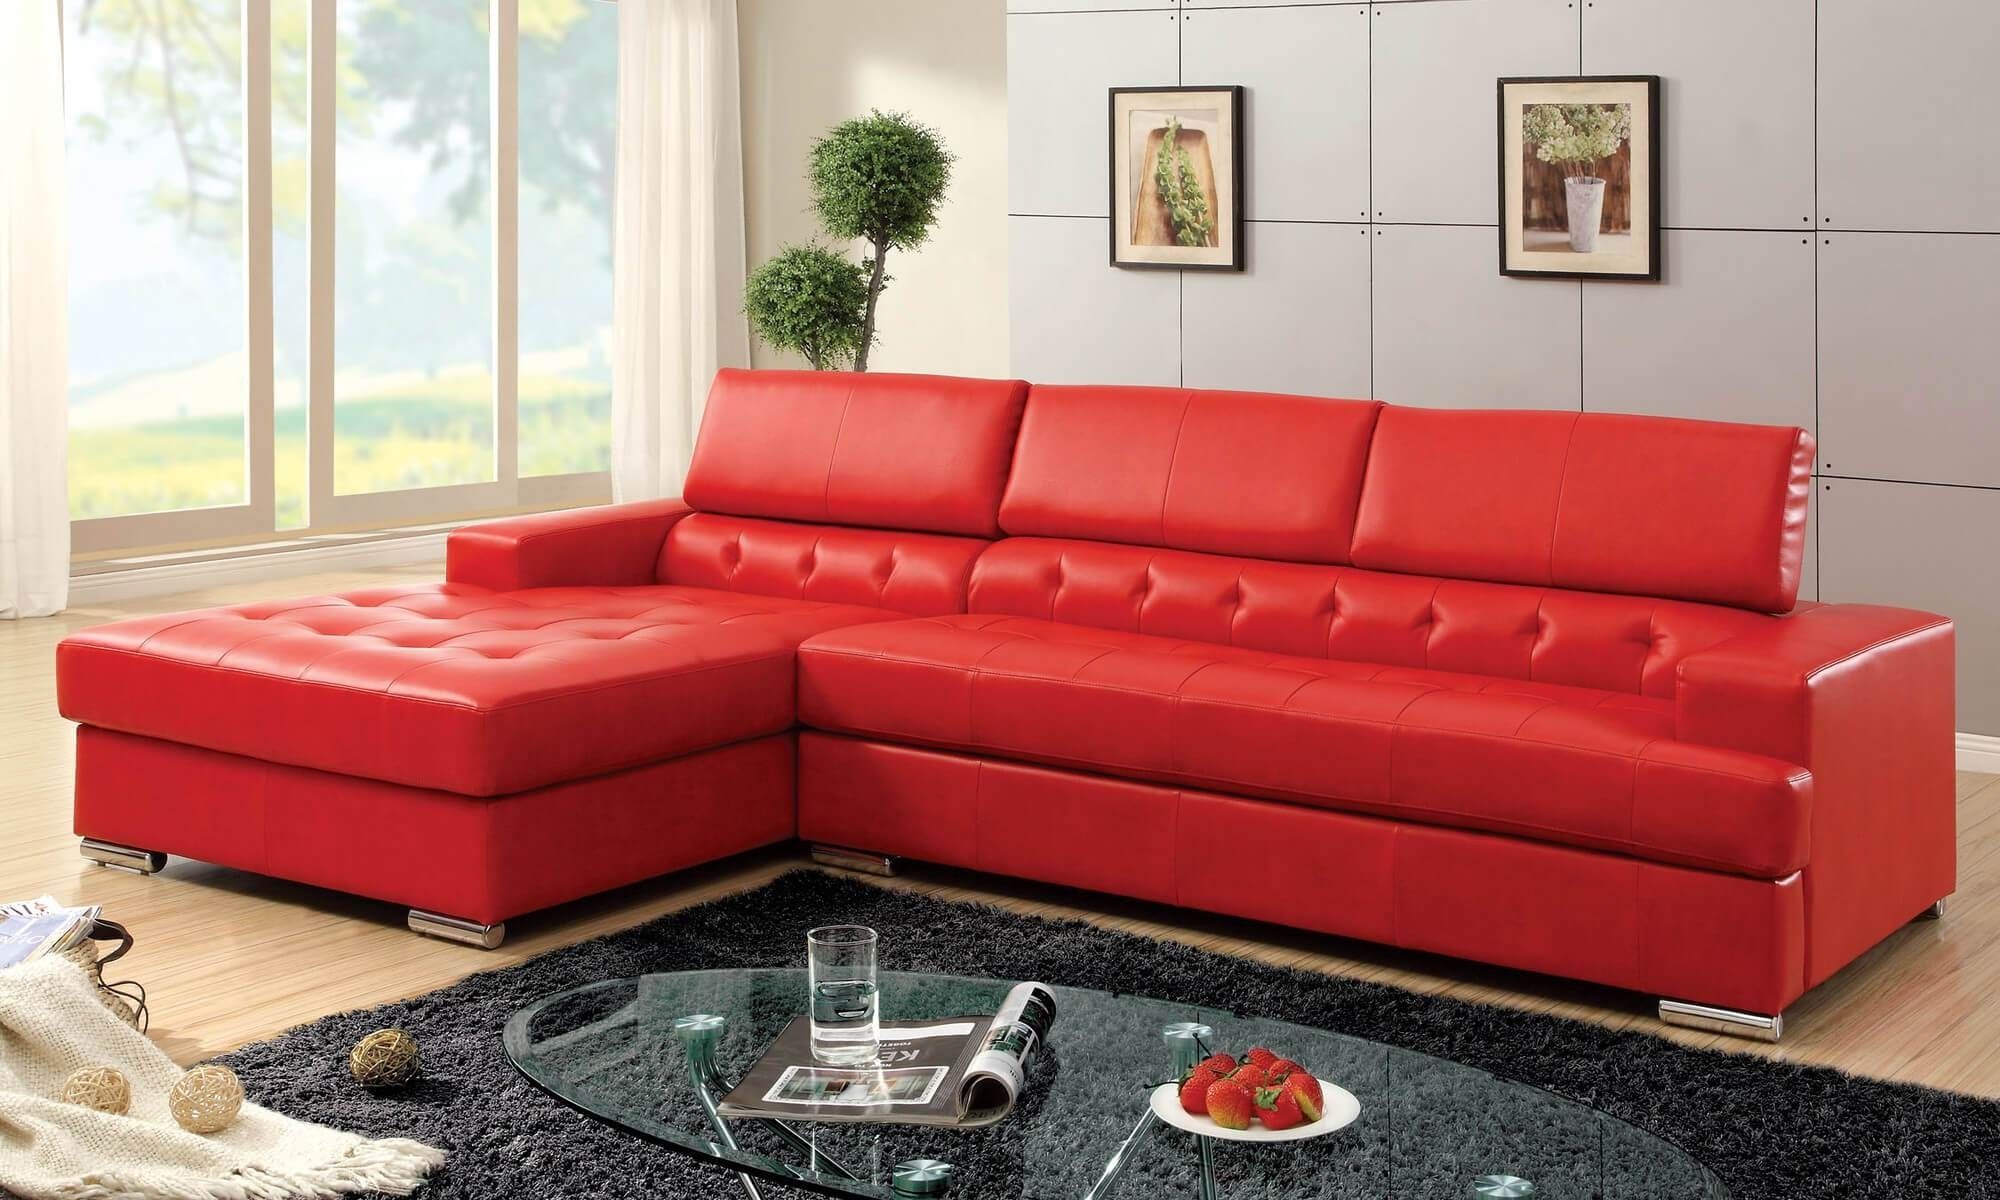 Awesome Cheap Red Leather Sofa Plan All About Home Design Jmhafencom Throughout Red Leather Sofas (View 15 of 15)